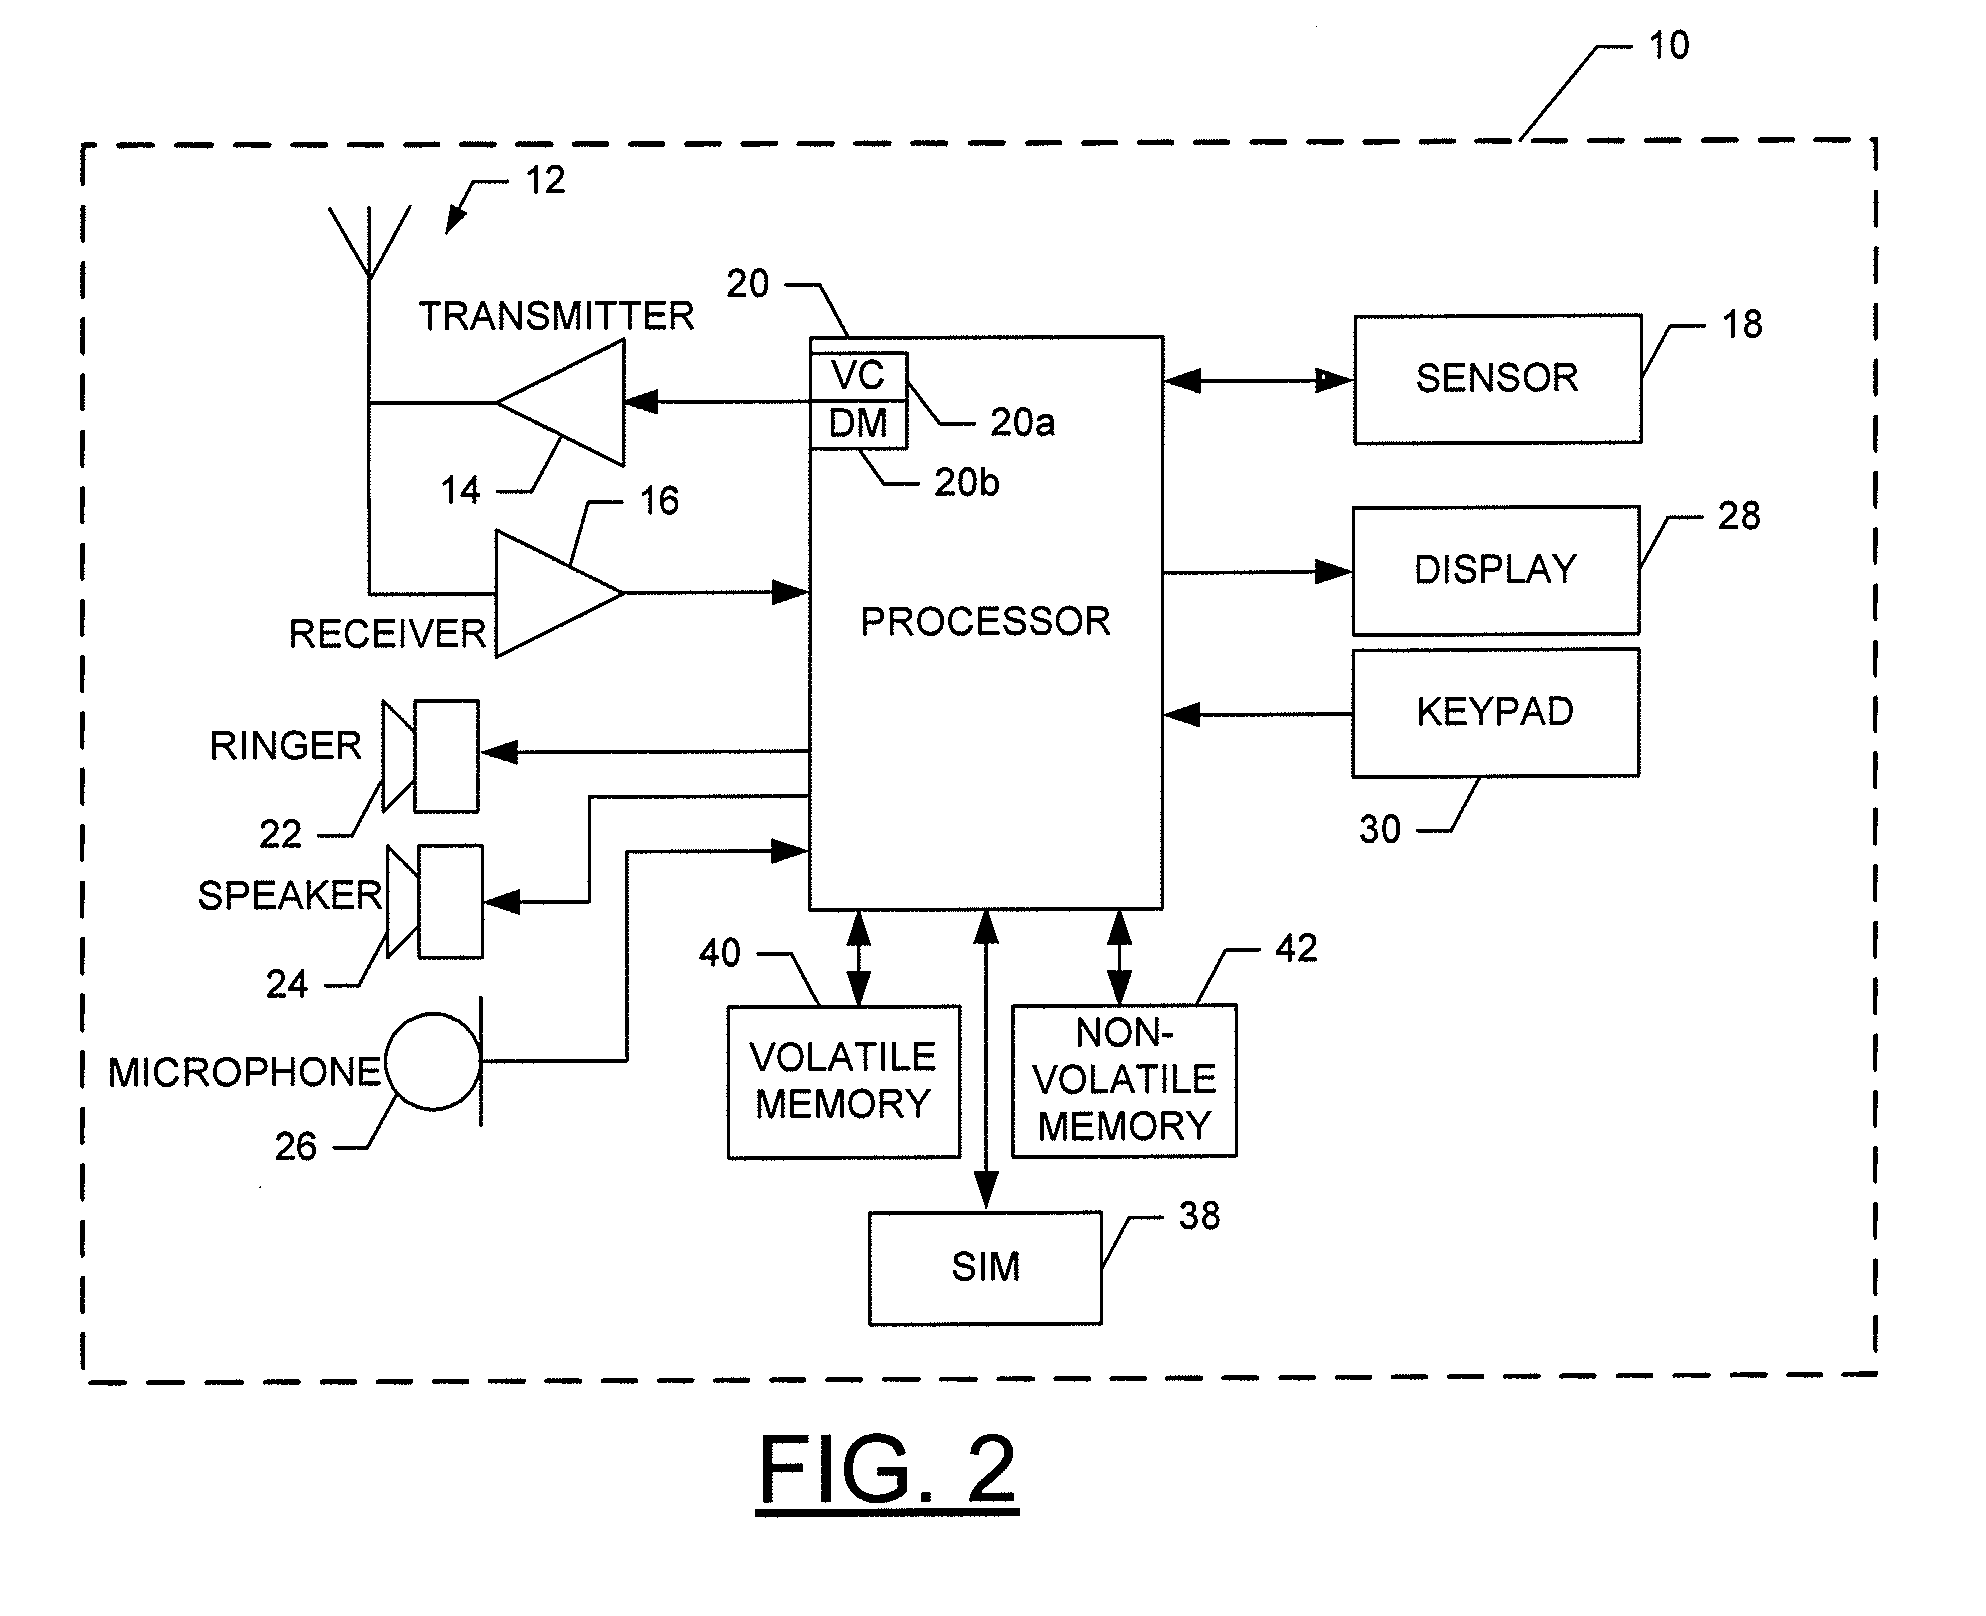 Methods, apparatuses, and computer program products for saving and resuming a state of a collaborative interaction session between devices based on their positional relationship